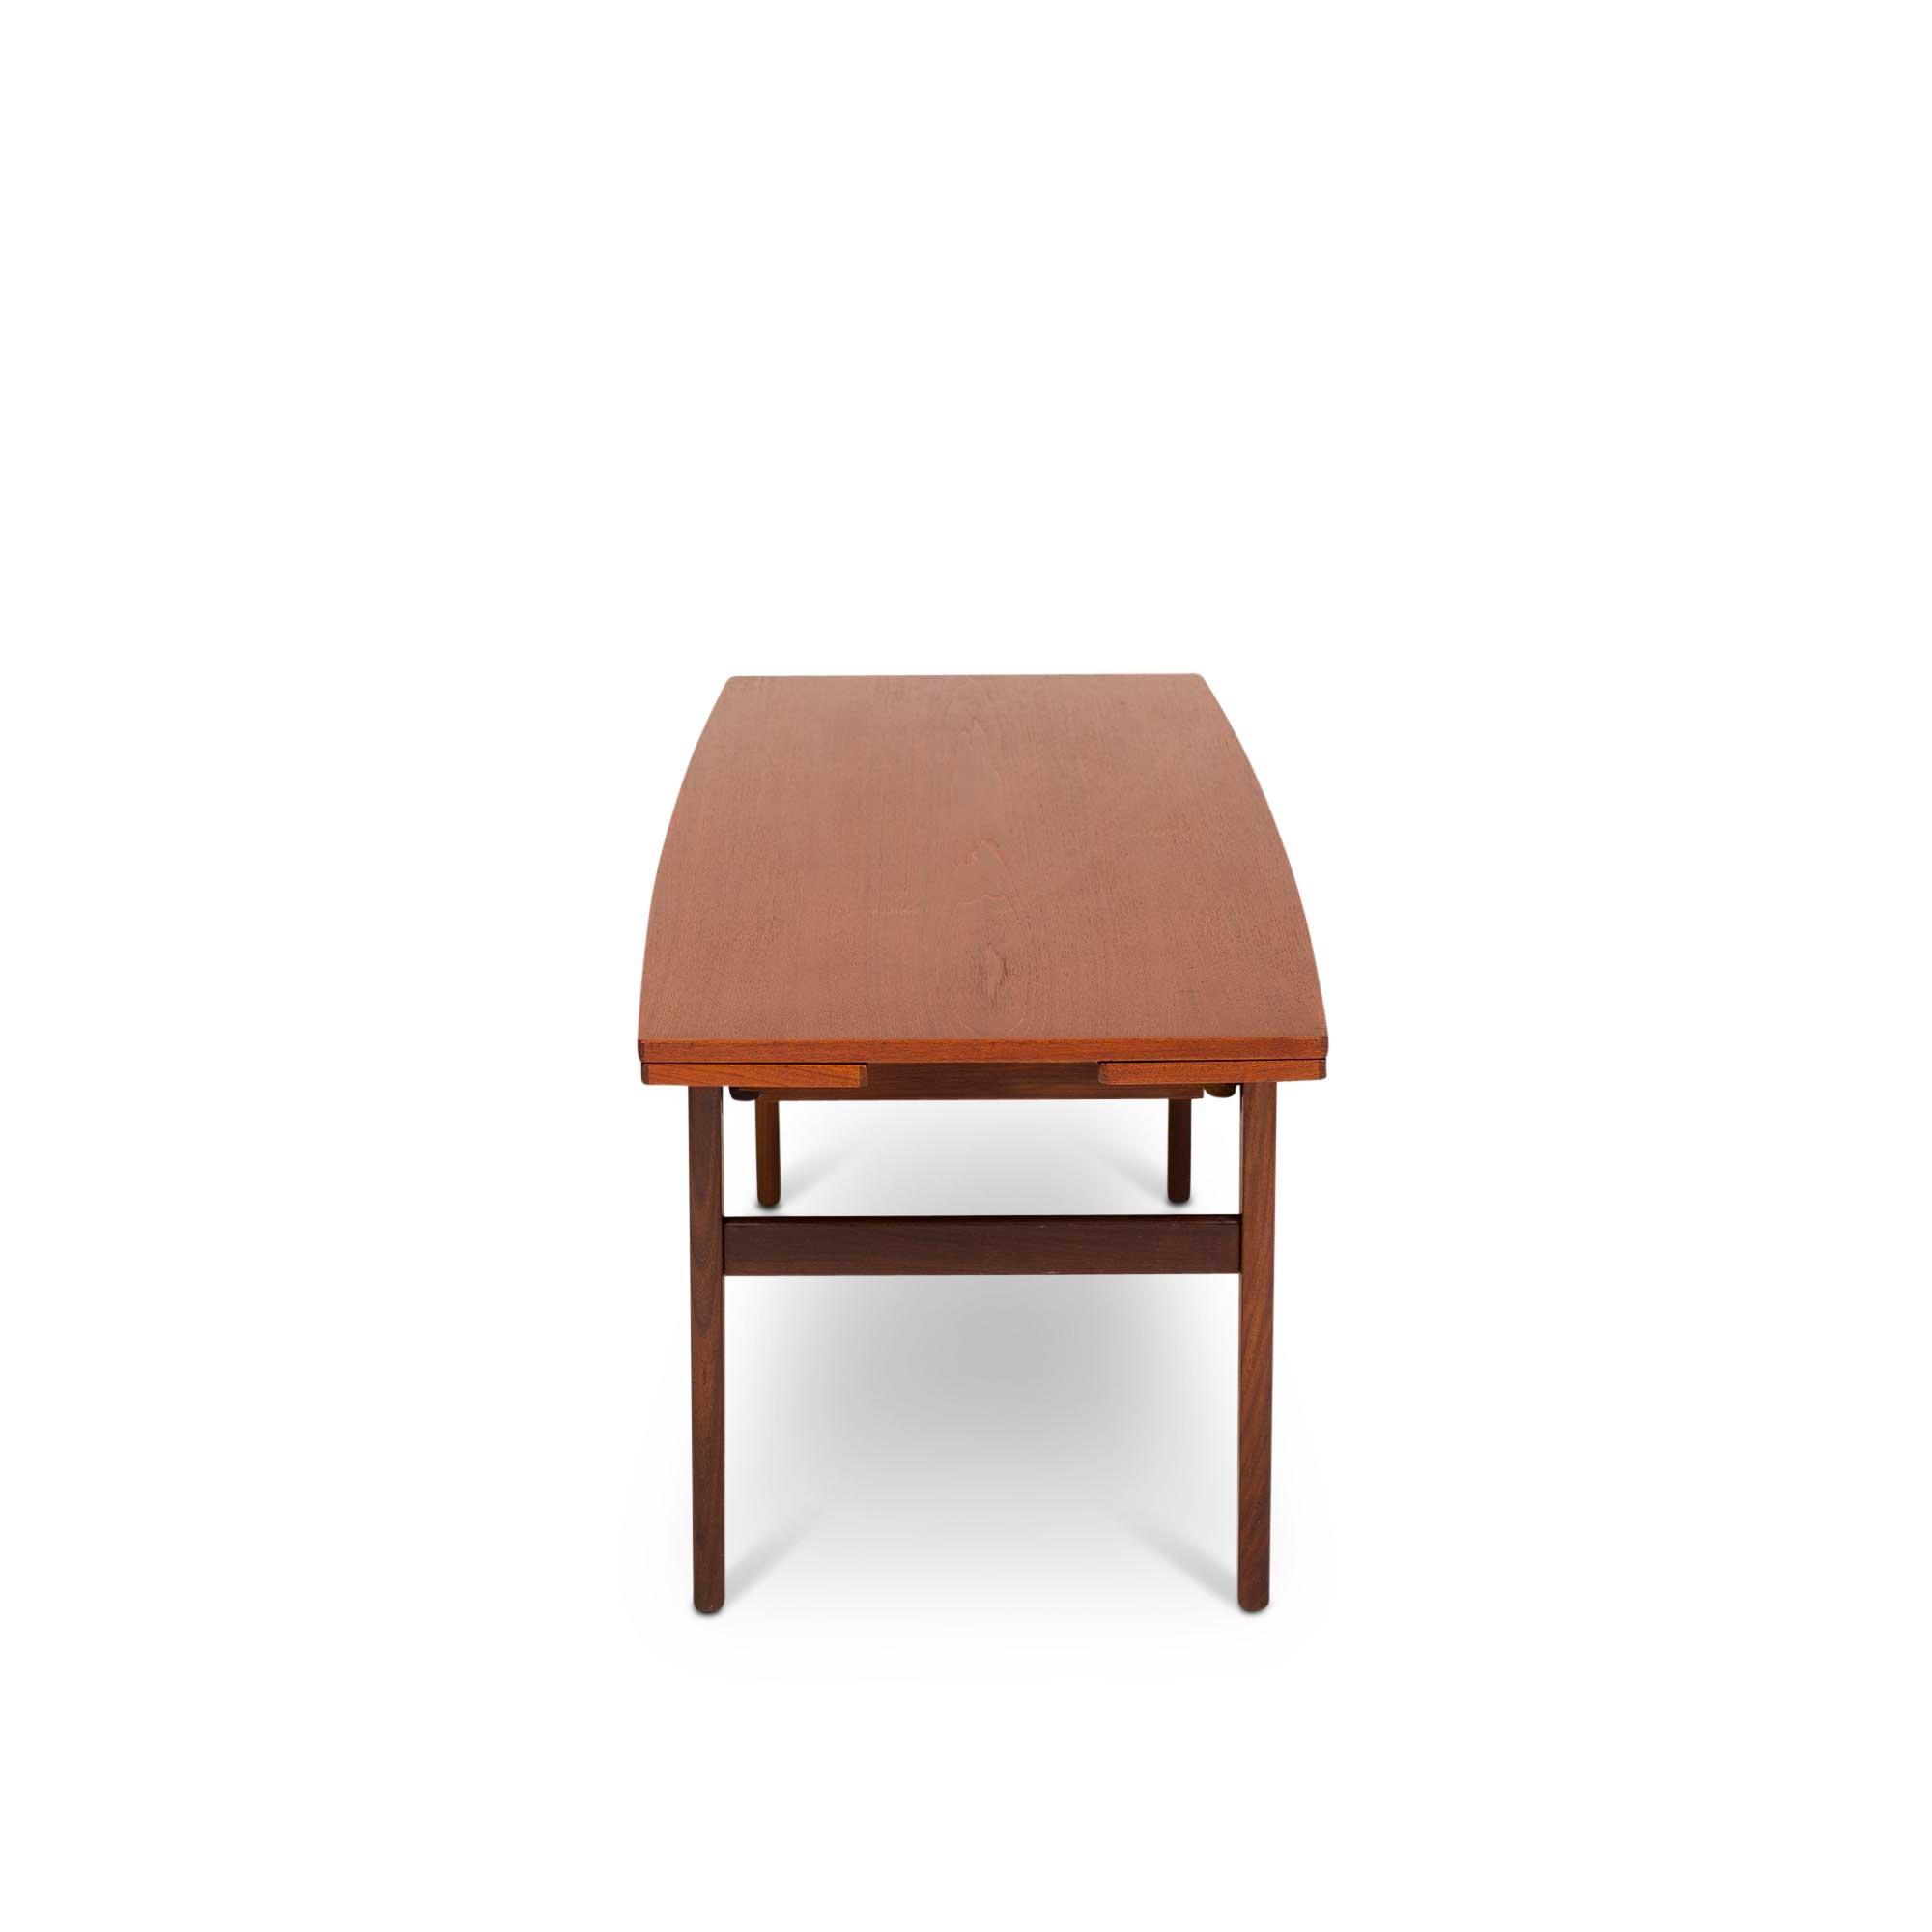 The Danish mid-century elevator coffee table is a remarkable piece of furniture that embodies the principles of Scandinavian design prevalent during the mid-20th century. This unique coffee table is characterized by its innovative design, which